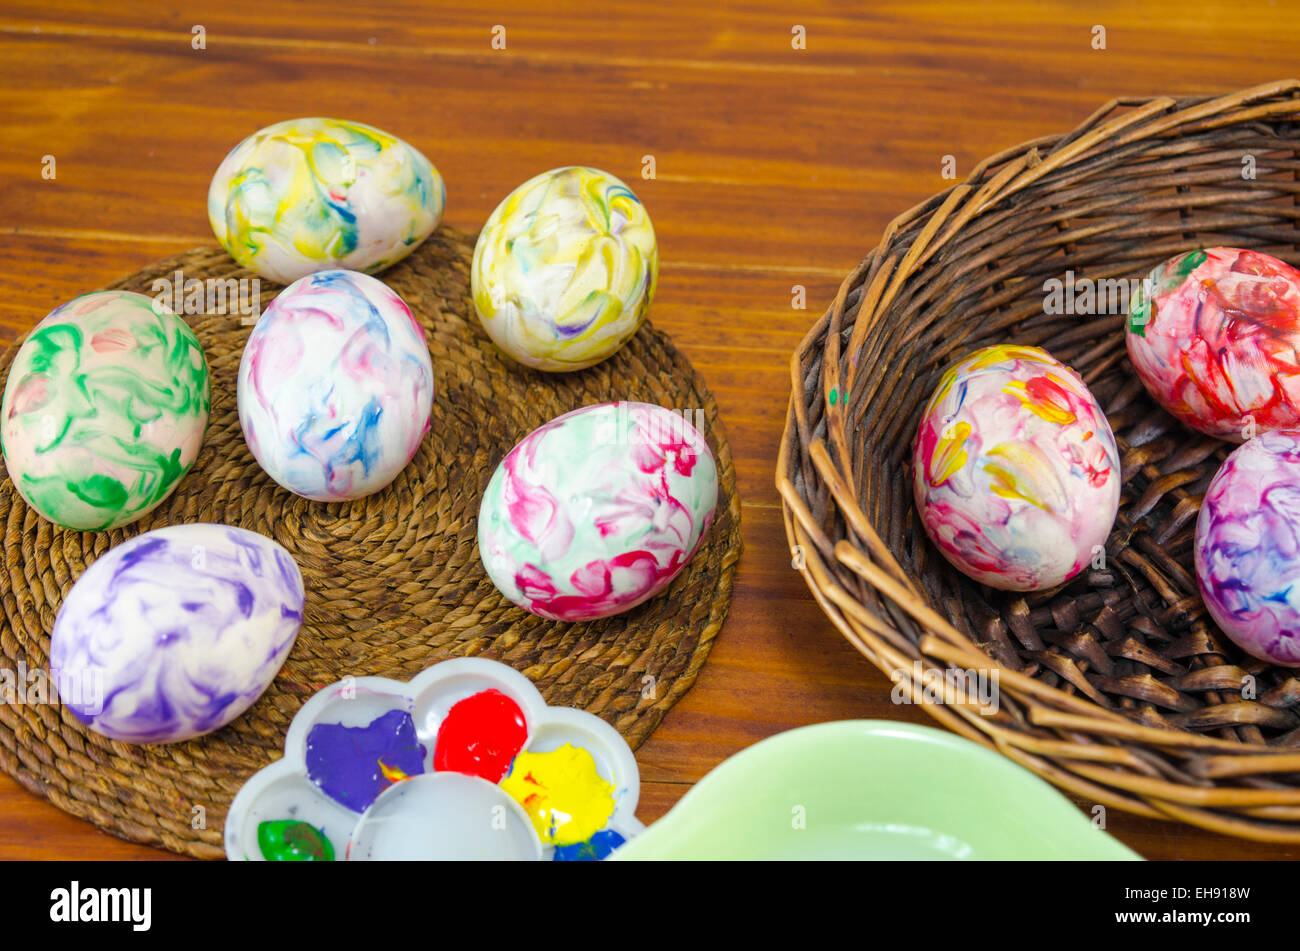 Freshly painted Easter eggs in a basket on a wooden table Stock Photo